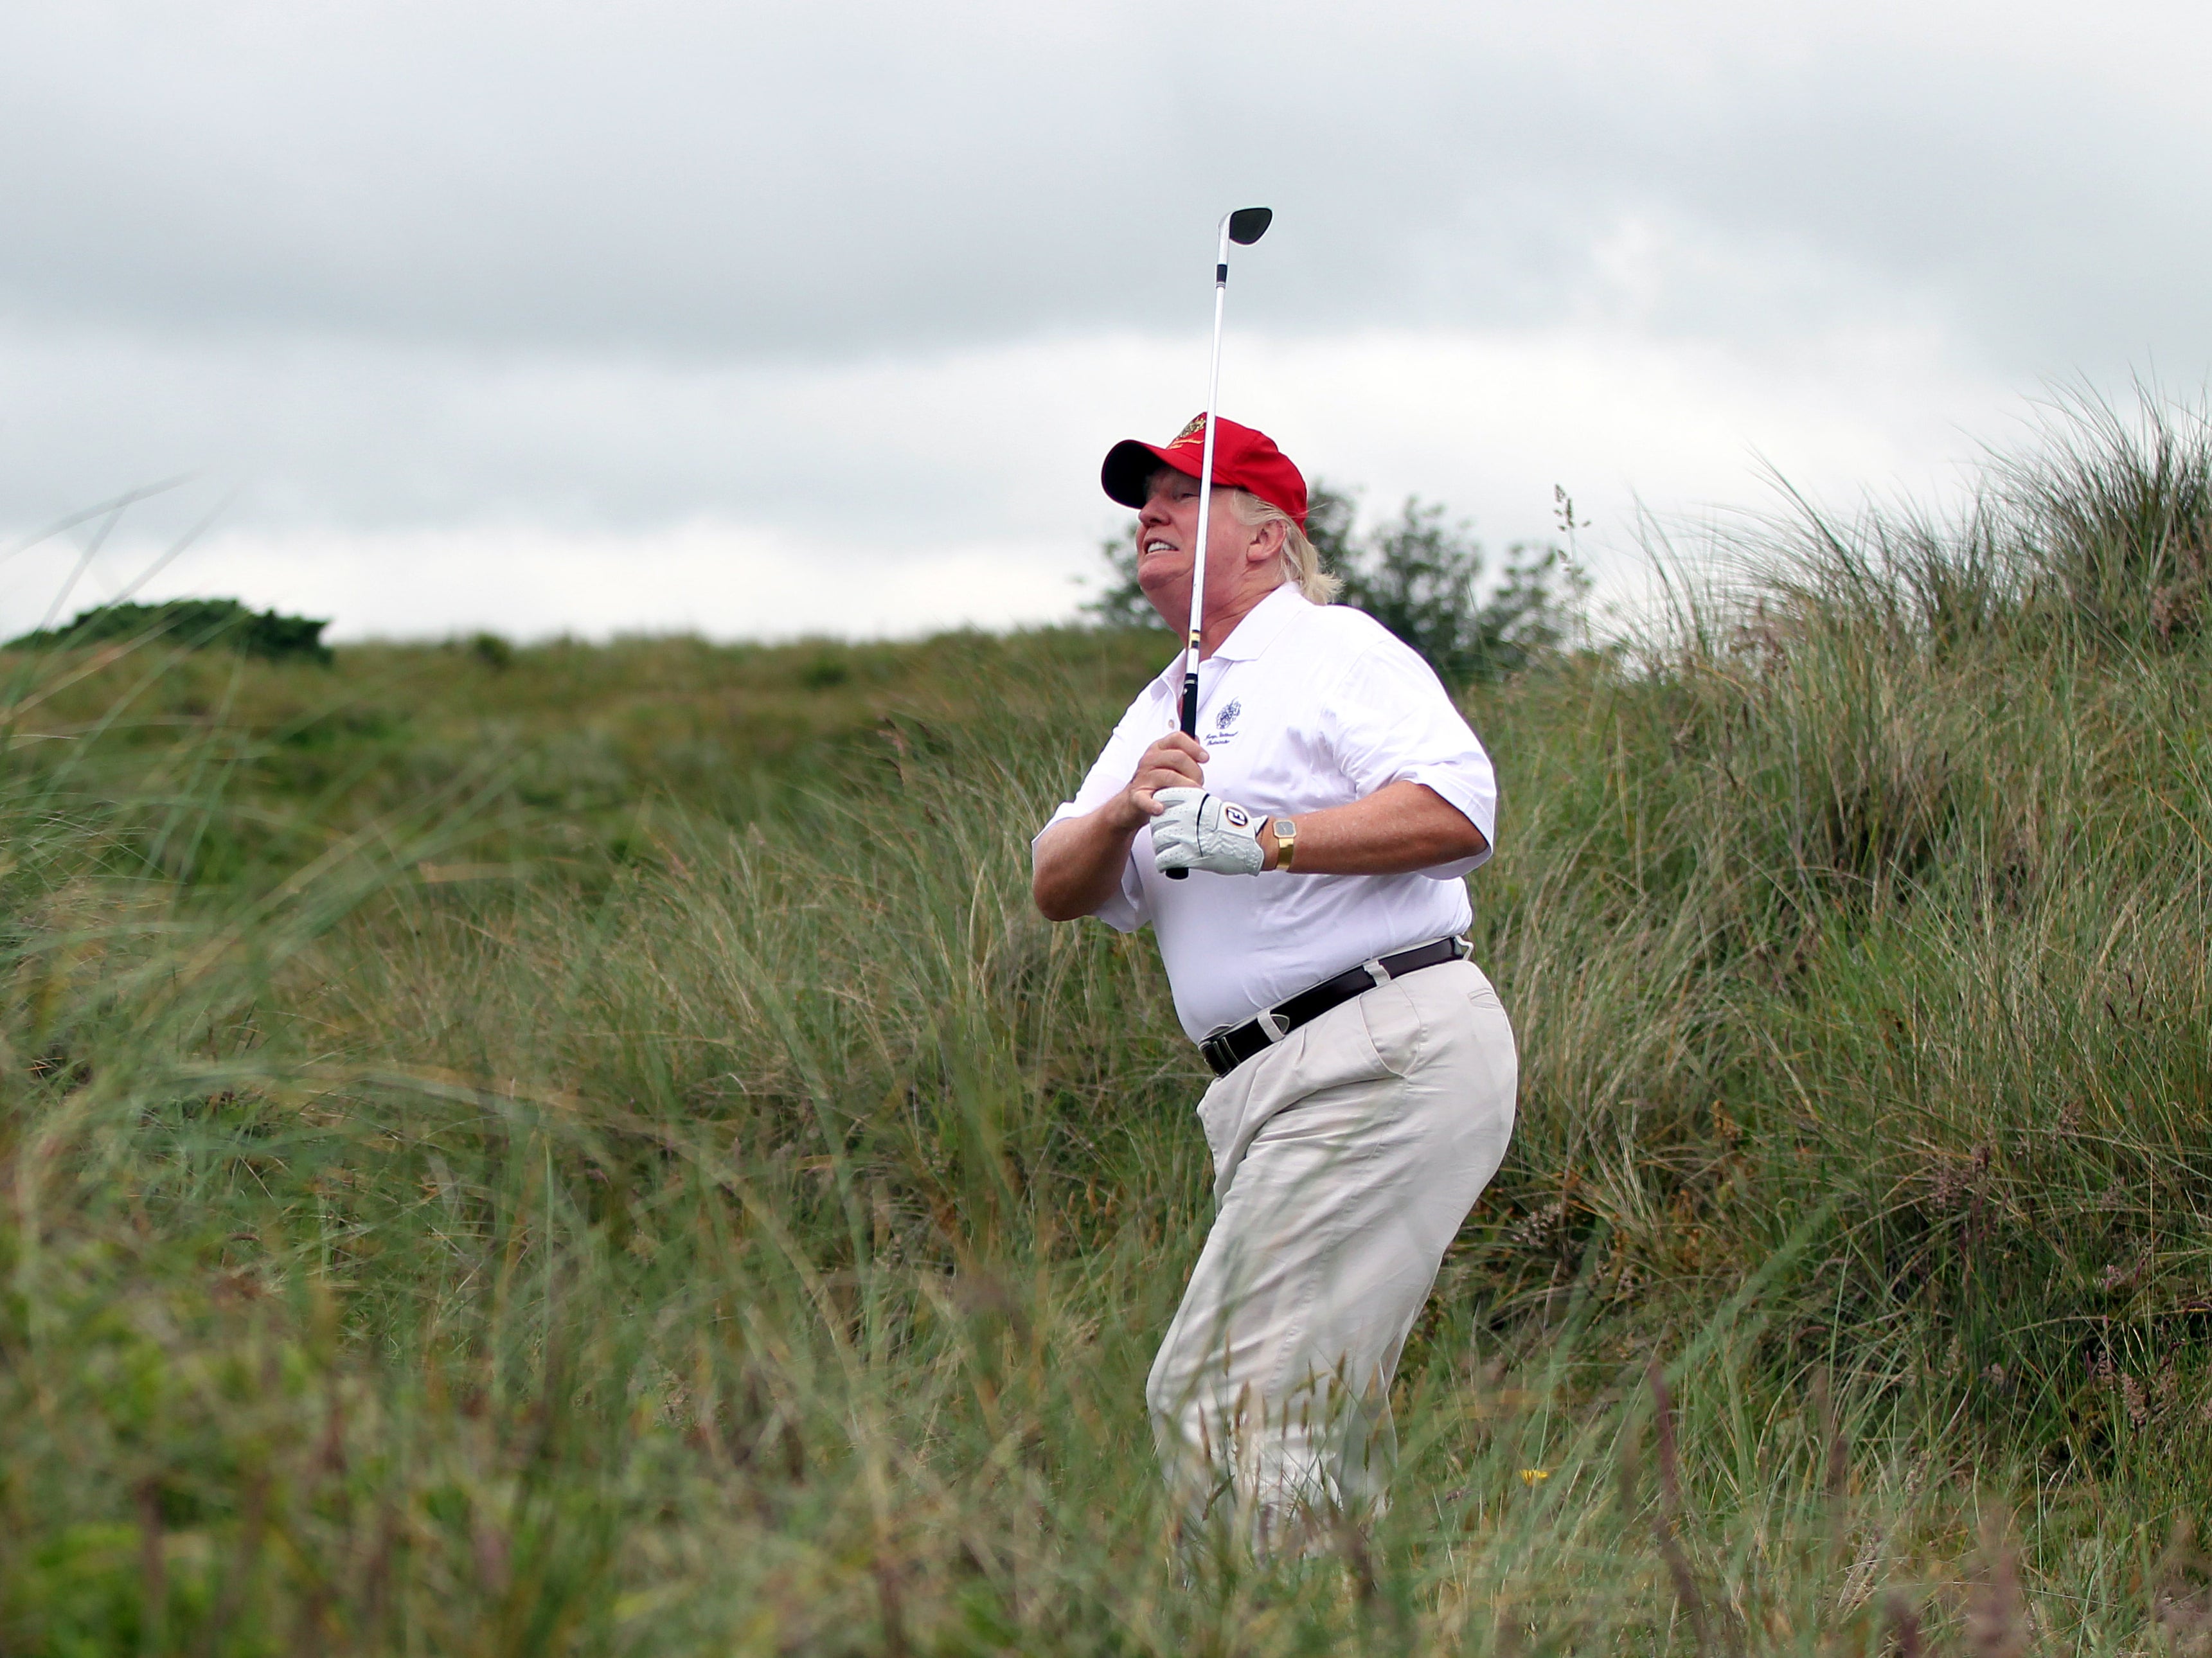 As a private citizen, Donald Trump has been losing weight and playing even more golf, advisors say